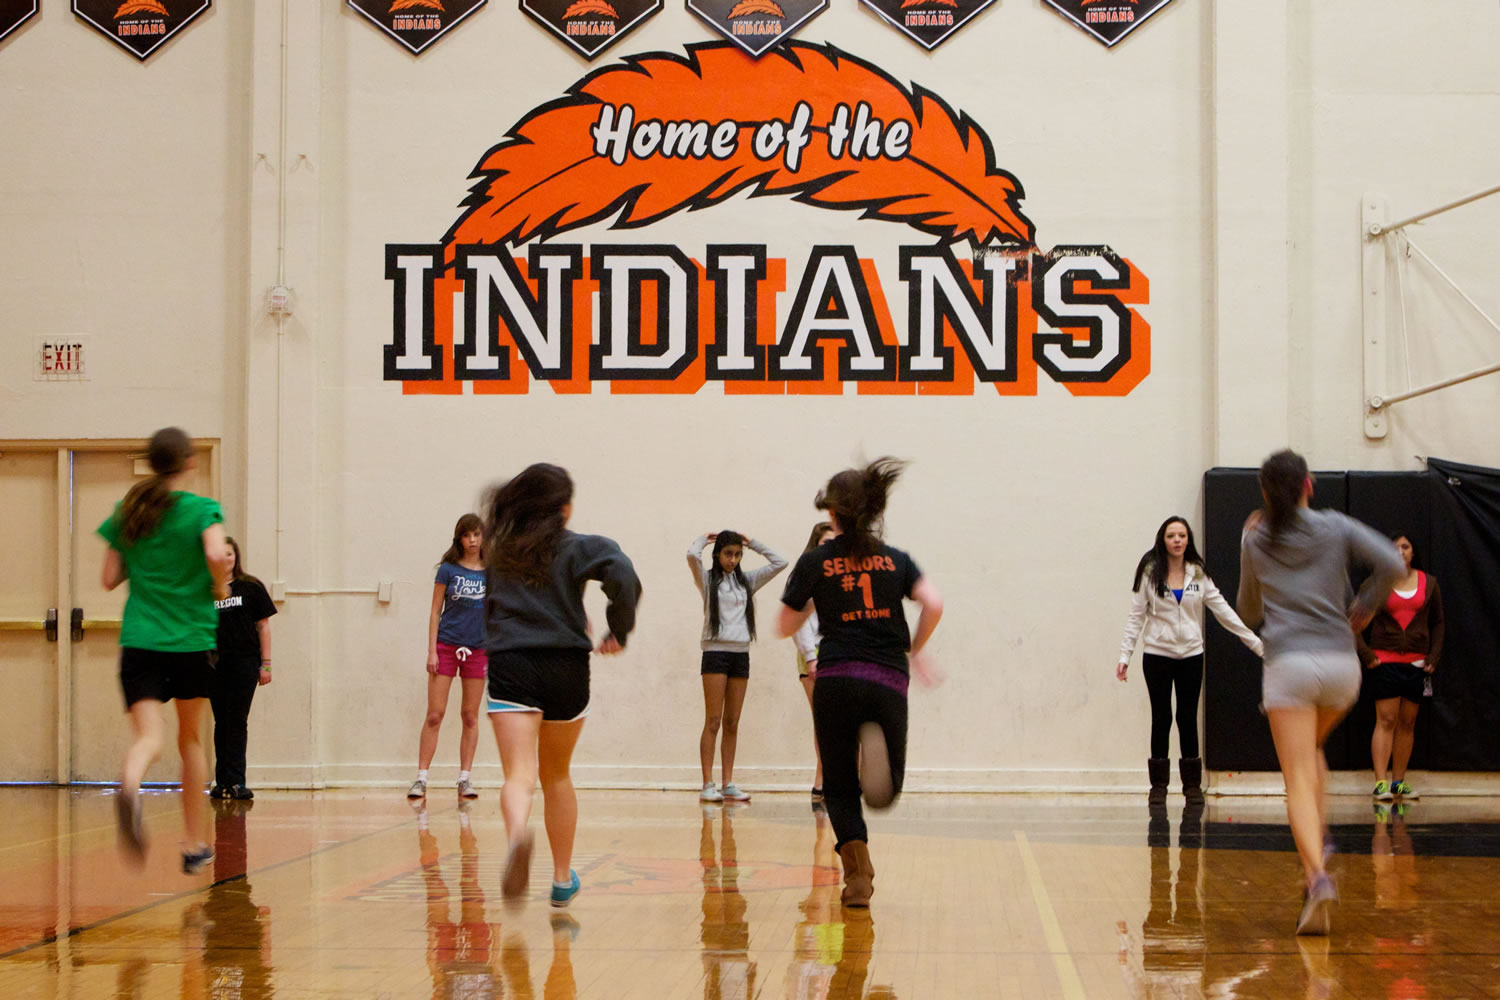 Students work out in the Roseburg High School gym in Roseburg, Ore. in February 2012.